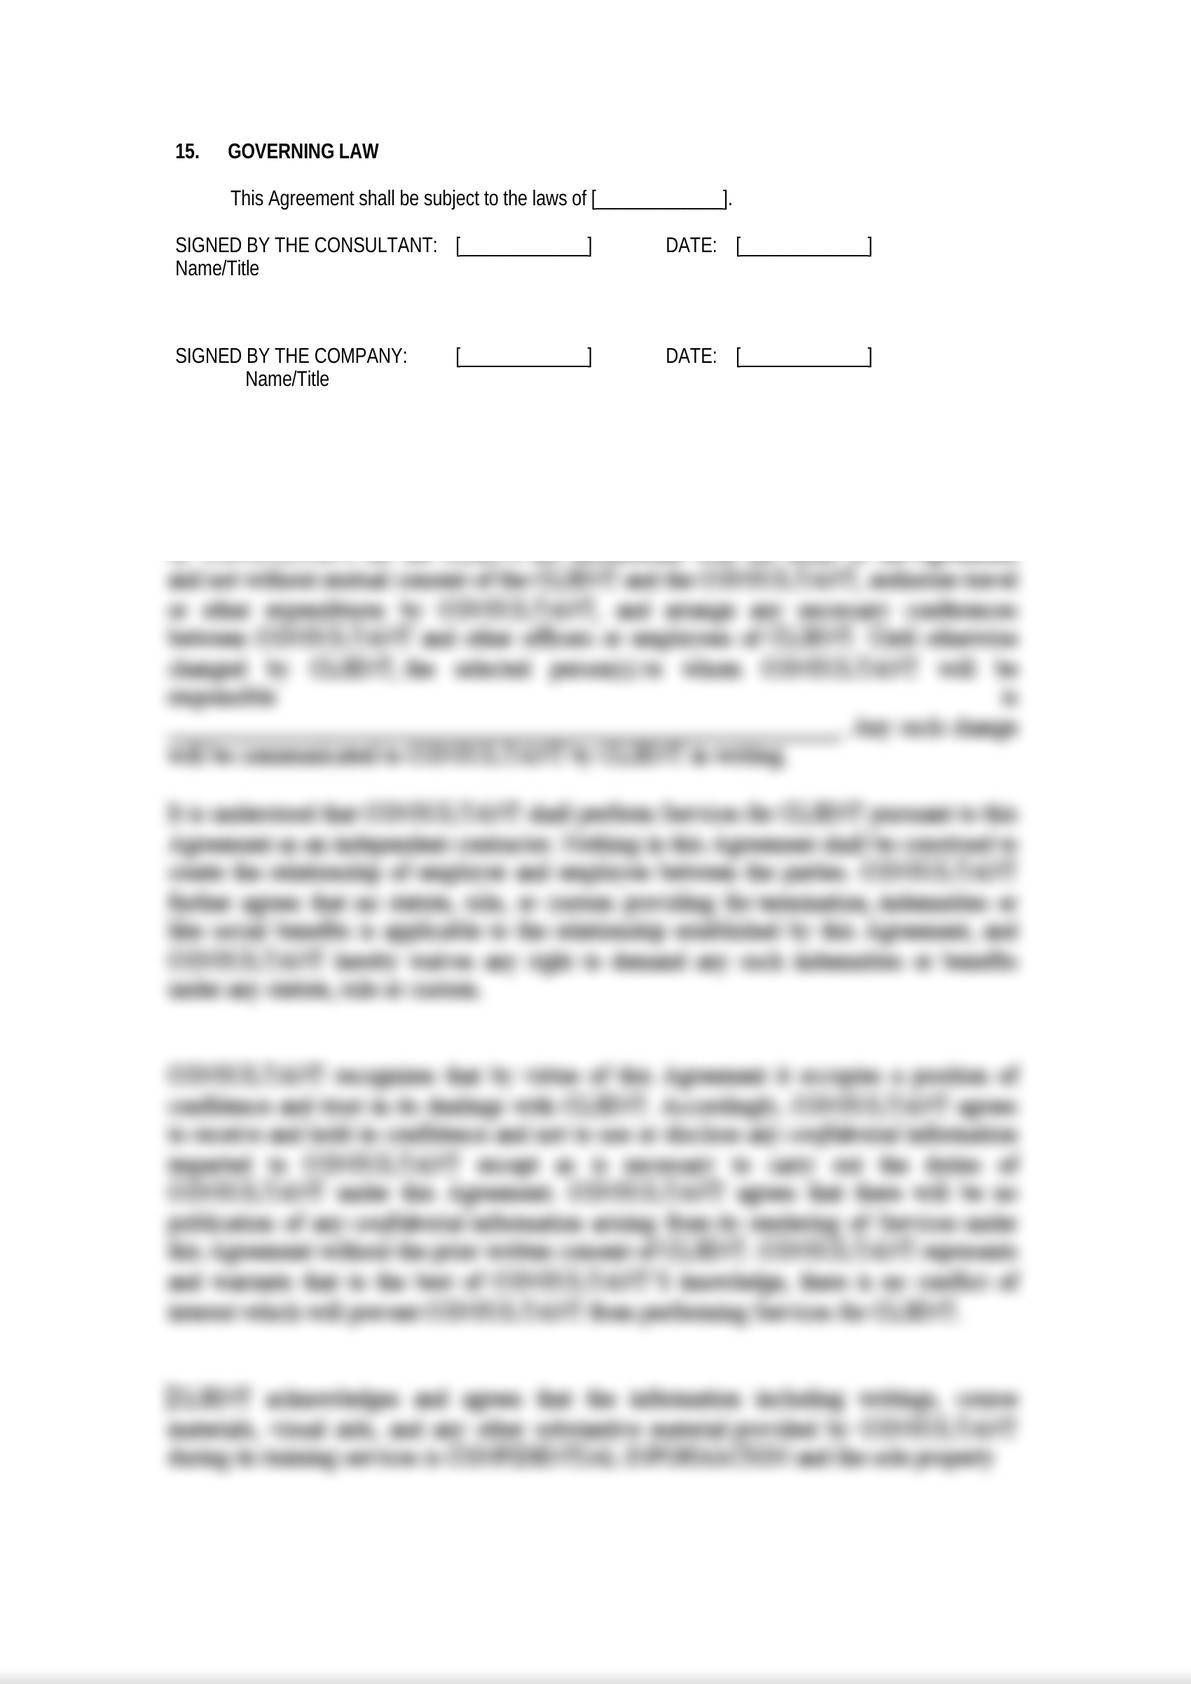 Agreement between a Consultant and a Production Company (Media Law)-3